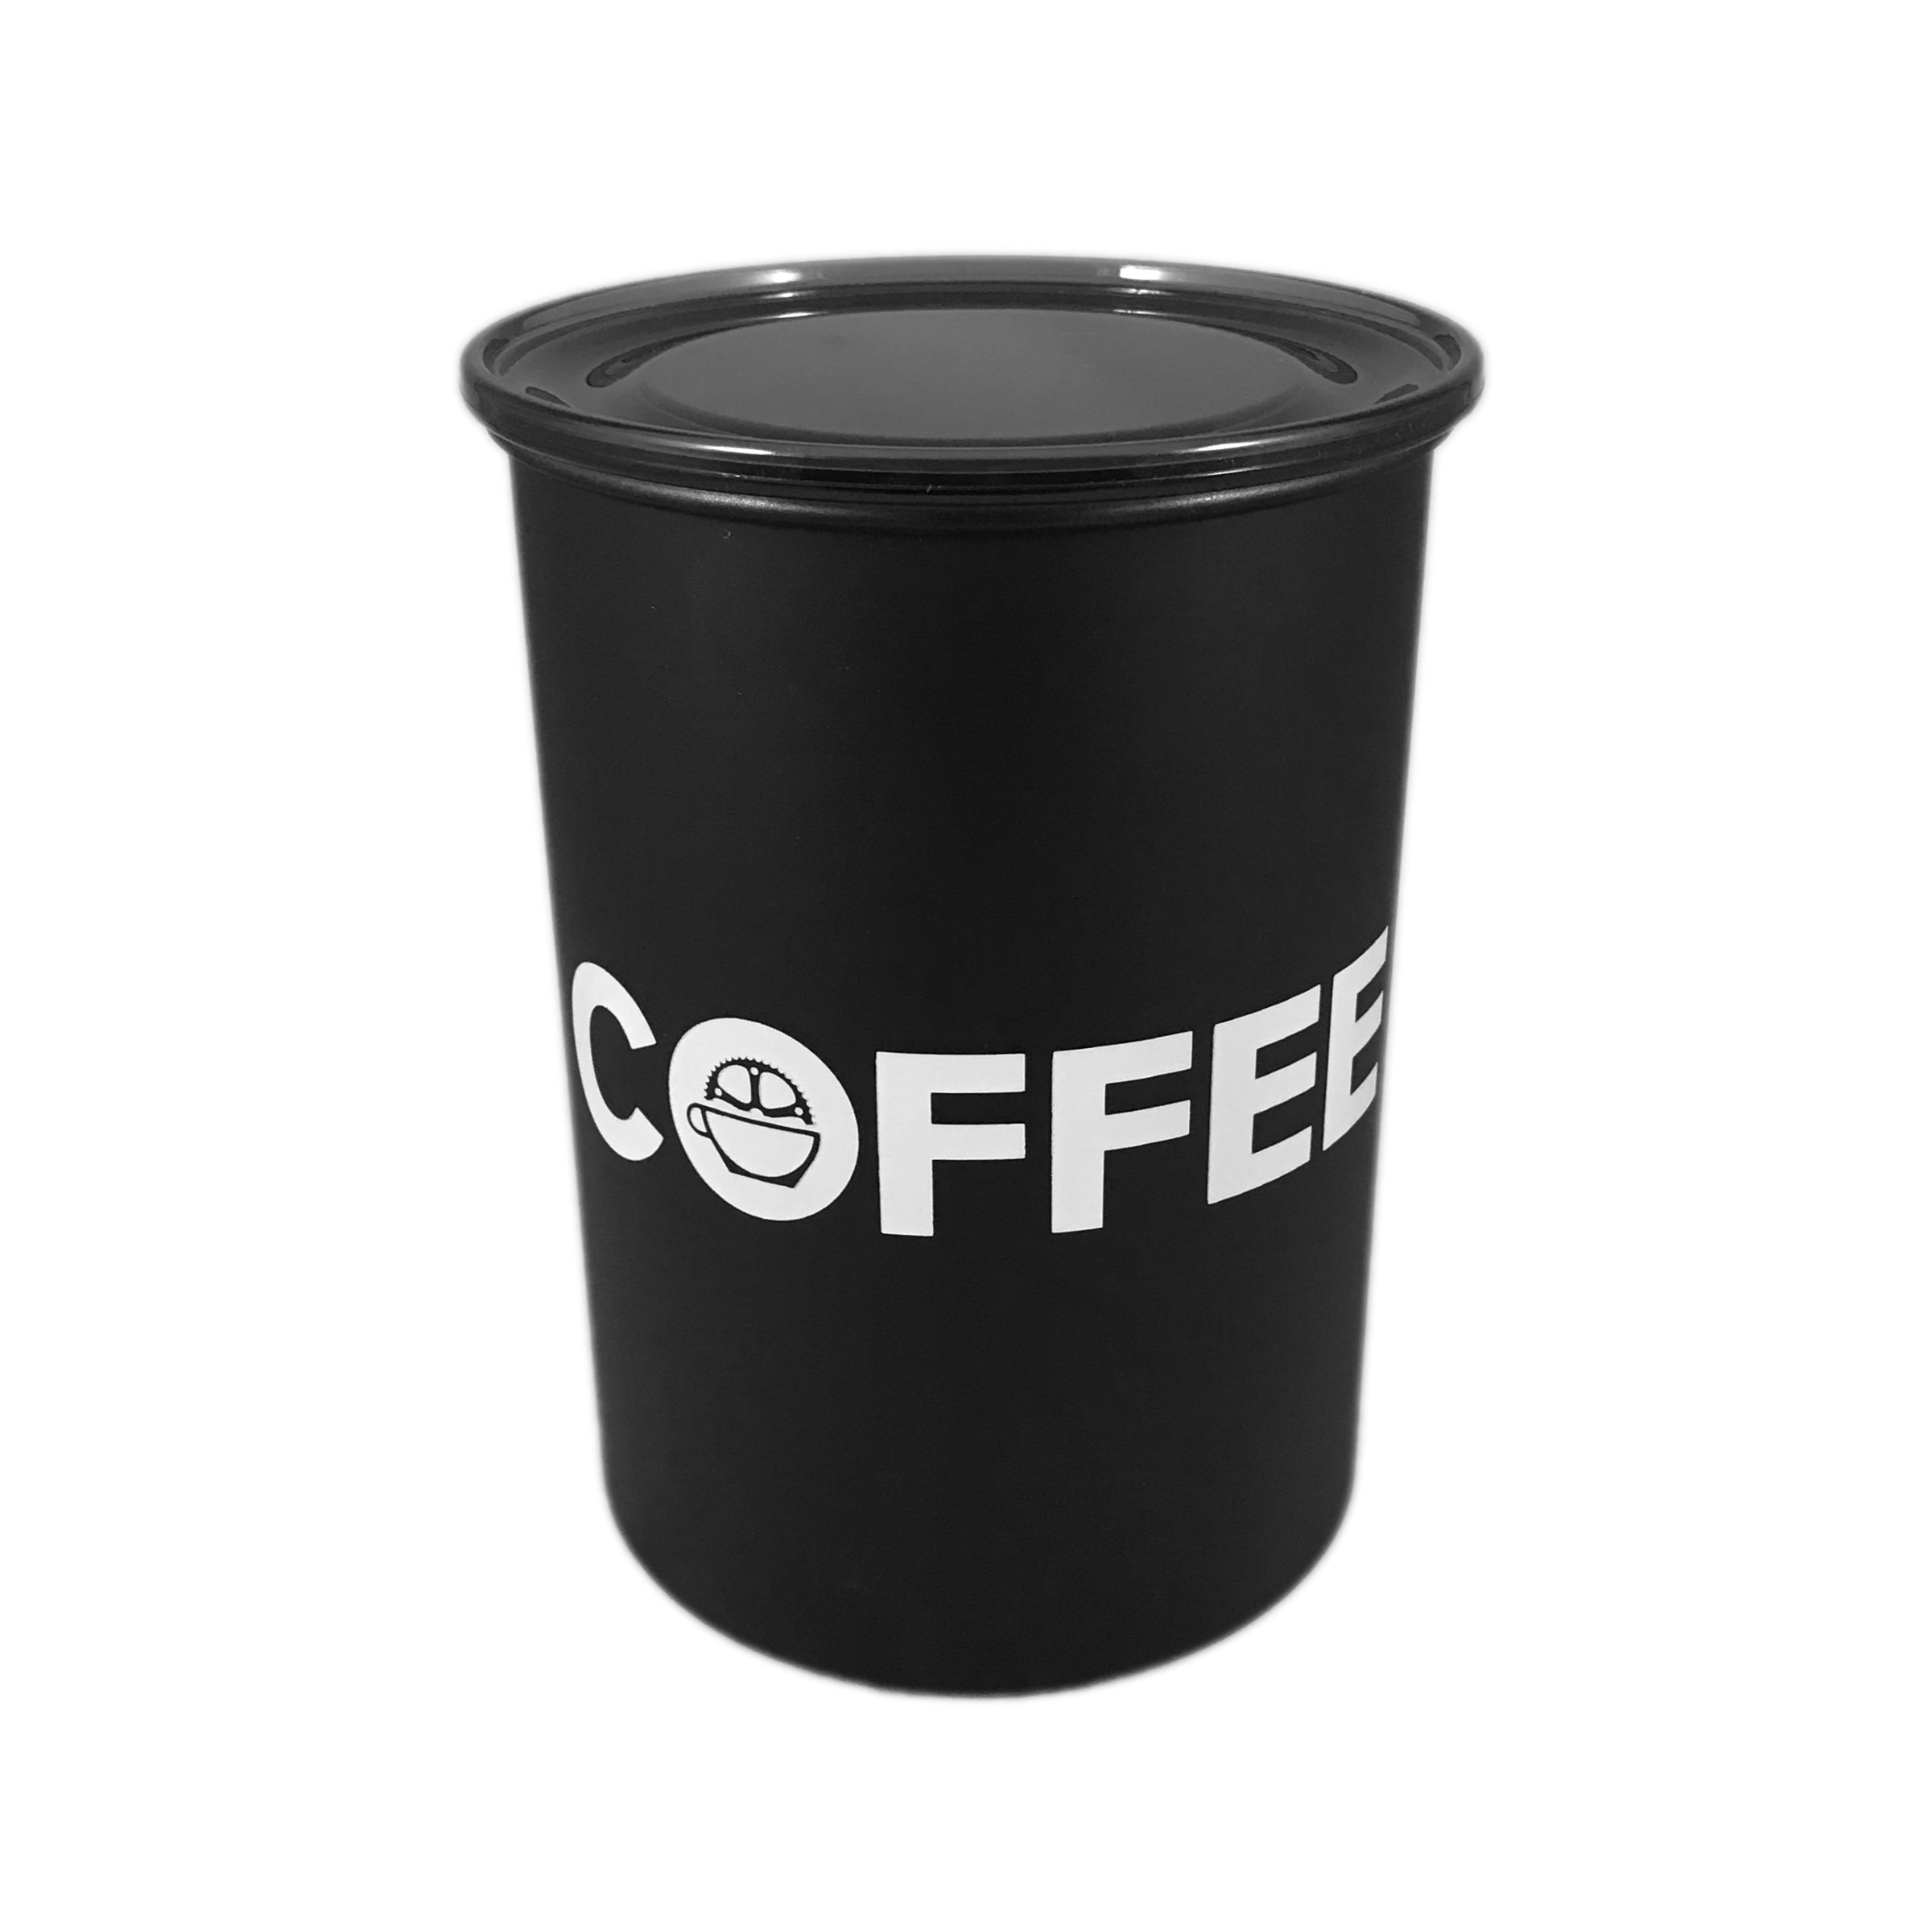 Hermetically-Sealing Coffee Canisters (1 lb. or 2.2 lb. Capacity)